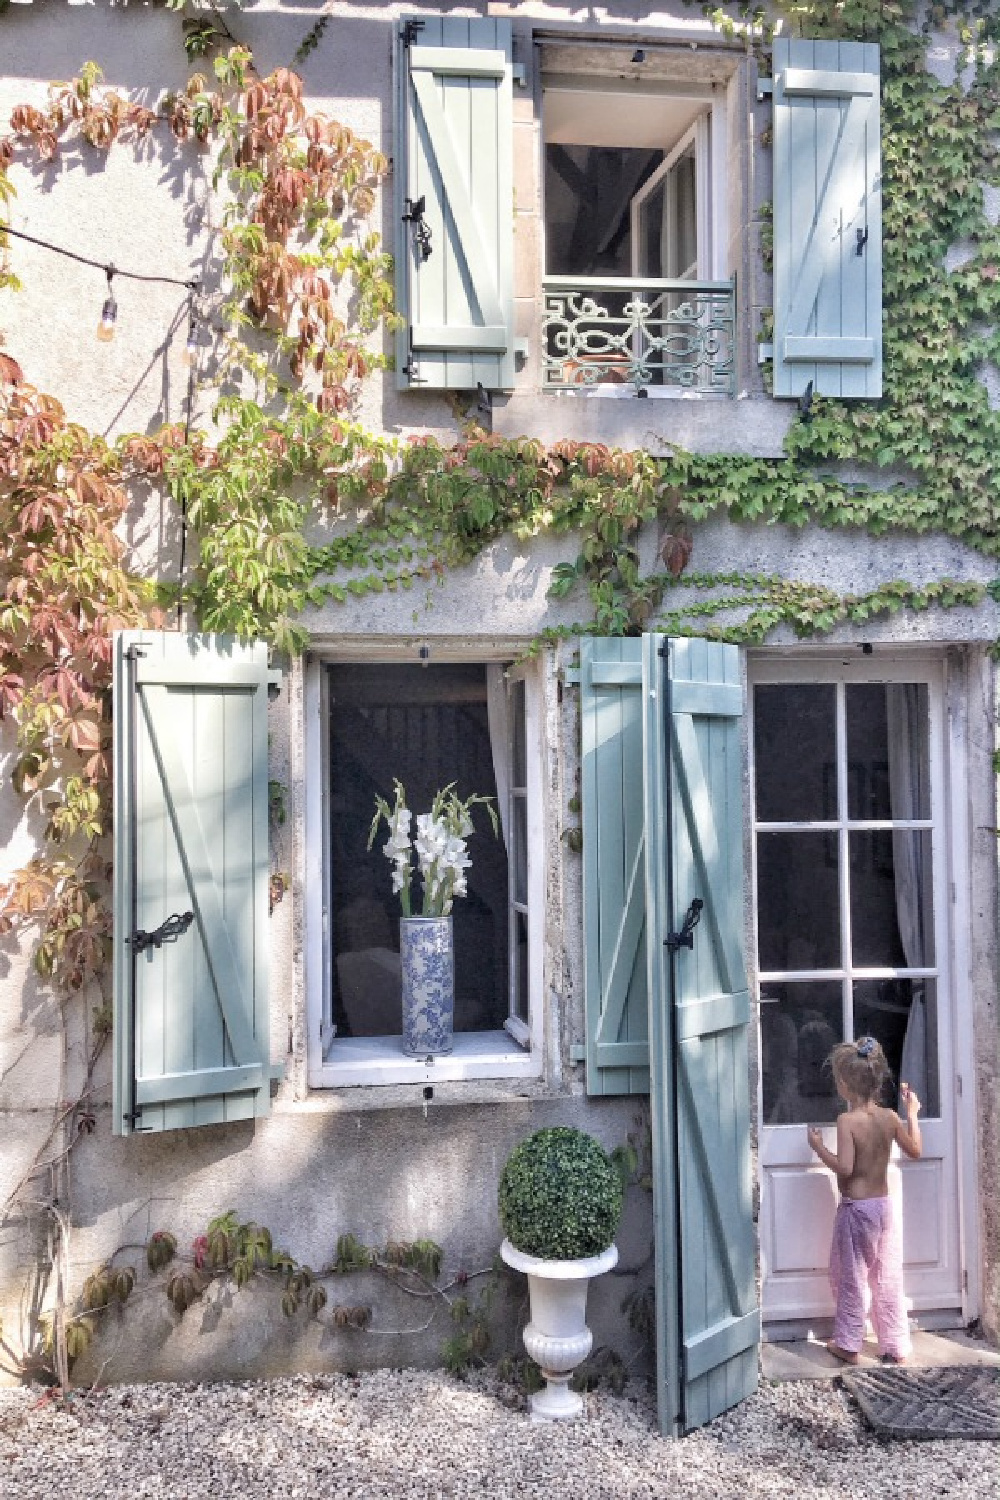 Green shutters and climbing vines on a breathtaking French farmhouse exterior. Vivi et Margot! Come be inspired by this house tour on Hello Lovely. #vivietmargo #frenchfarmhouse #climbingvines #exterior #greenshutters #vertolivier #romanticdecor #frenchcountry #europeanfarmhouse